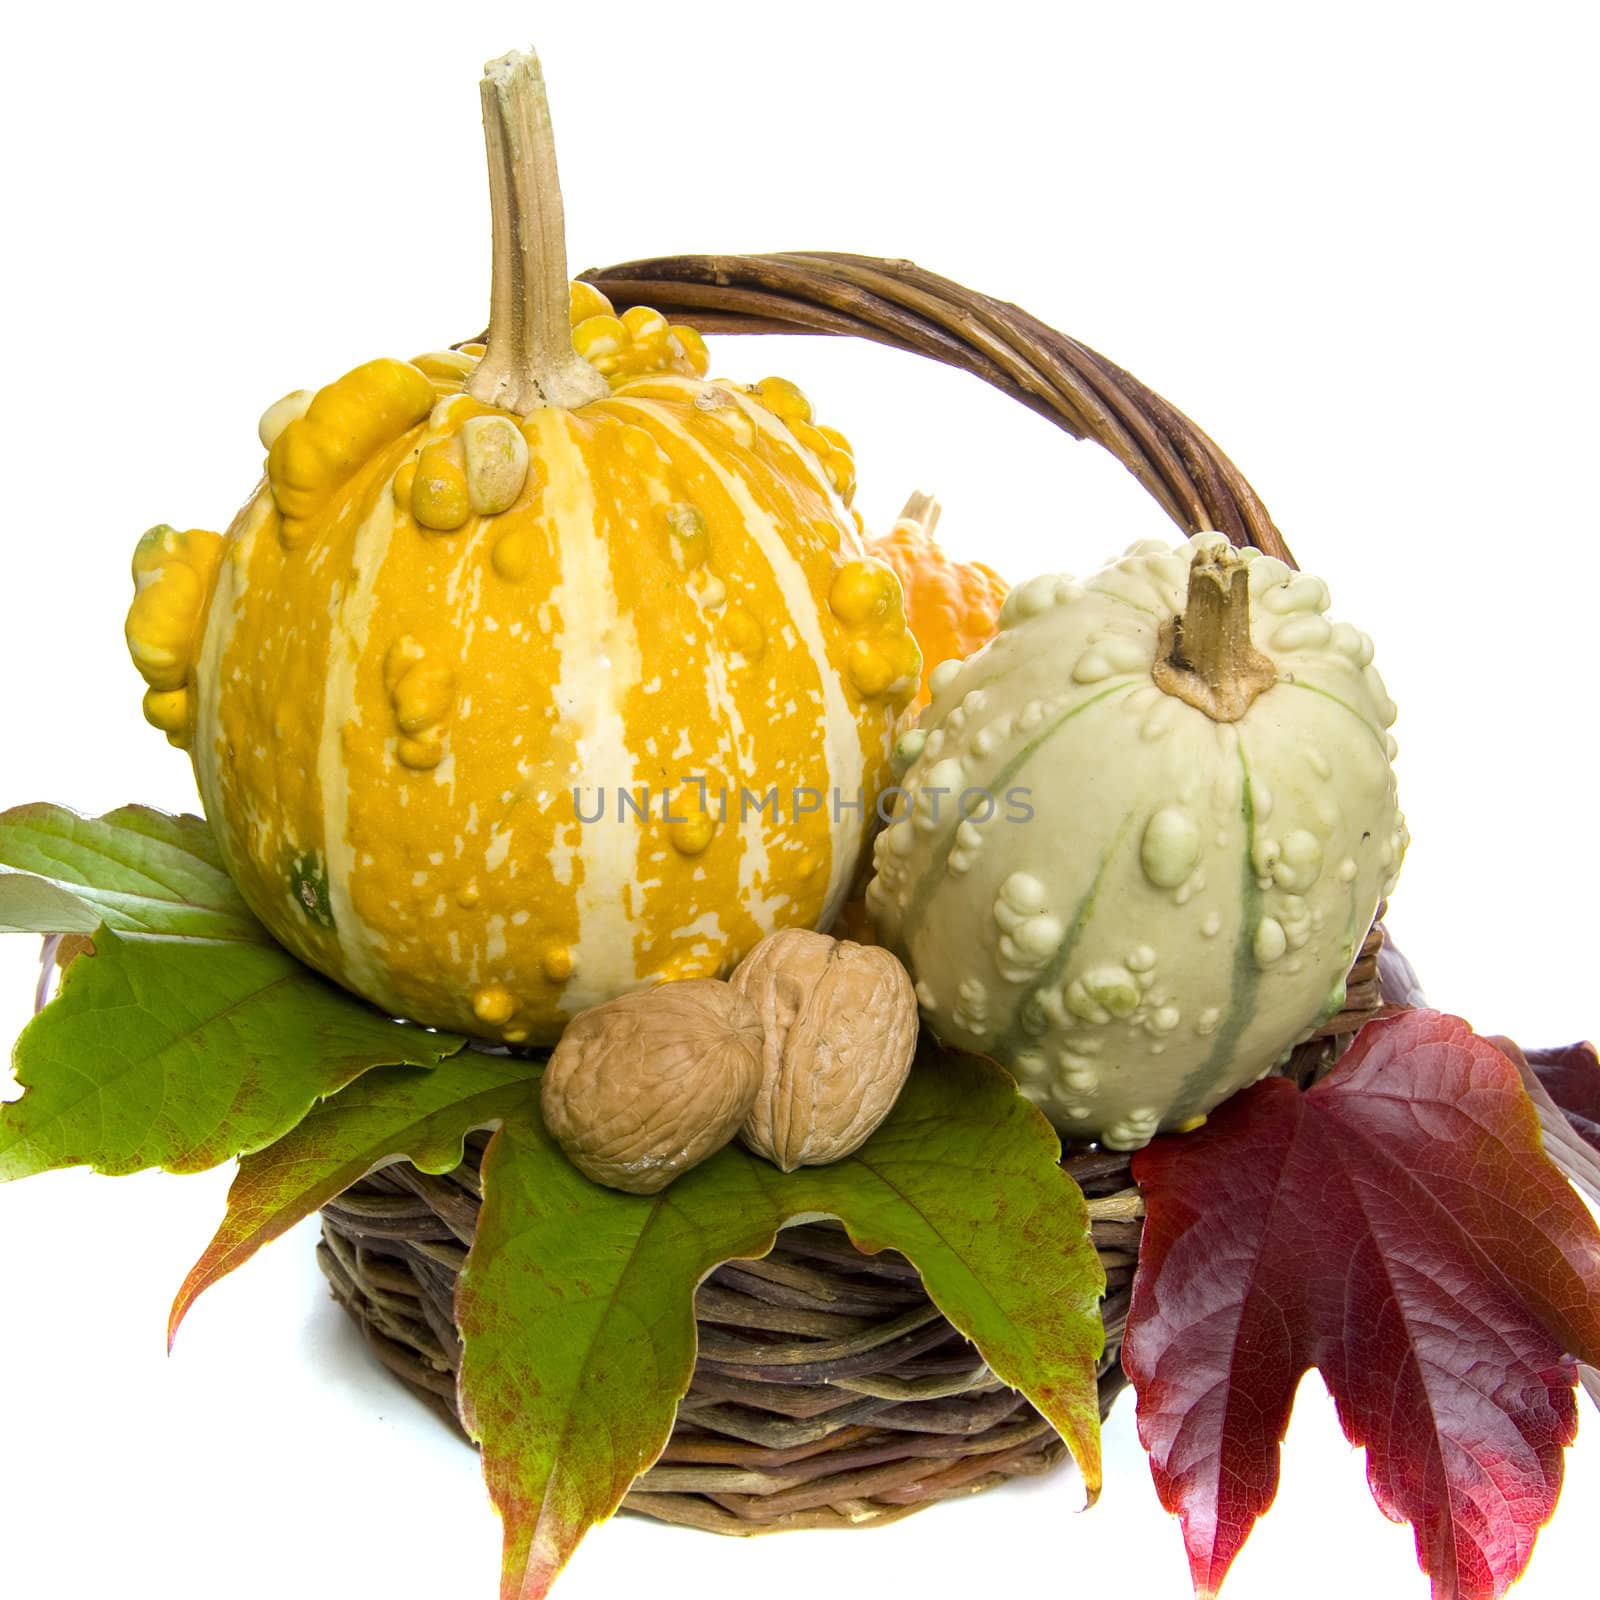 calabashes in a basket on a white background